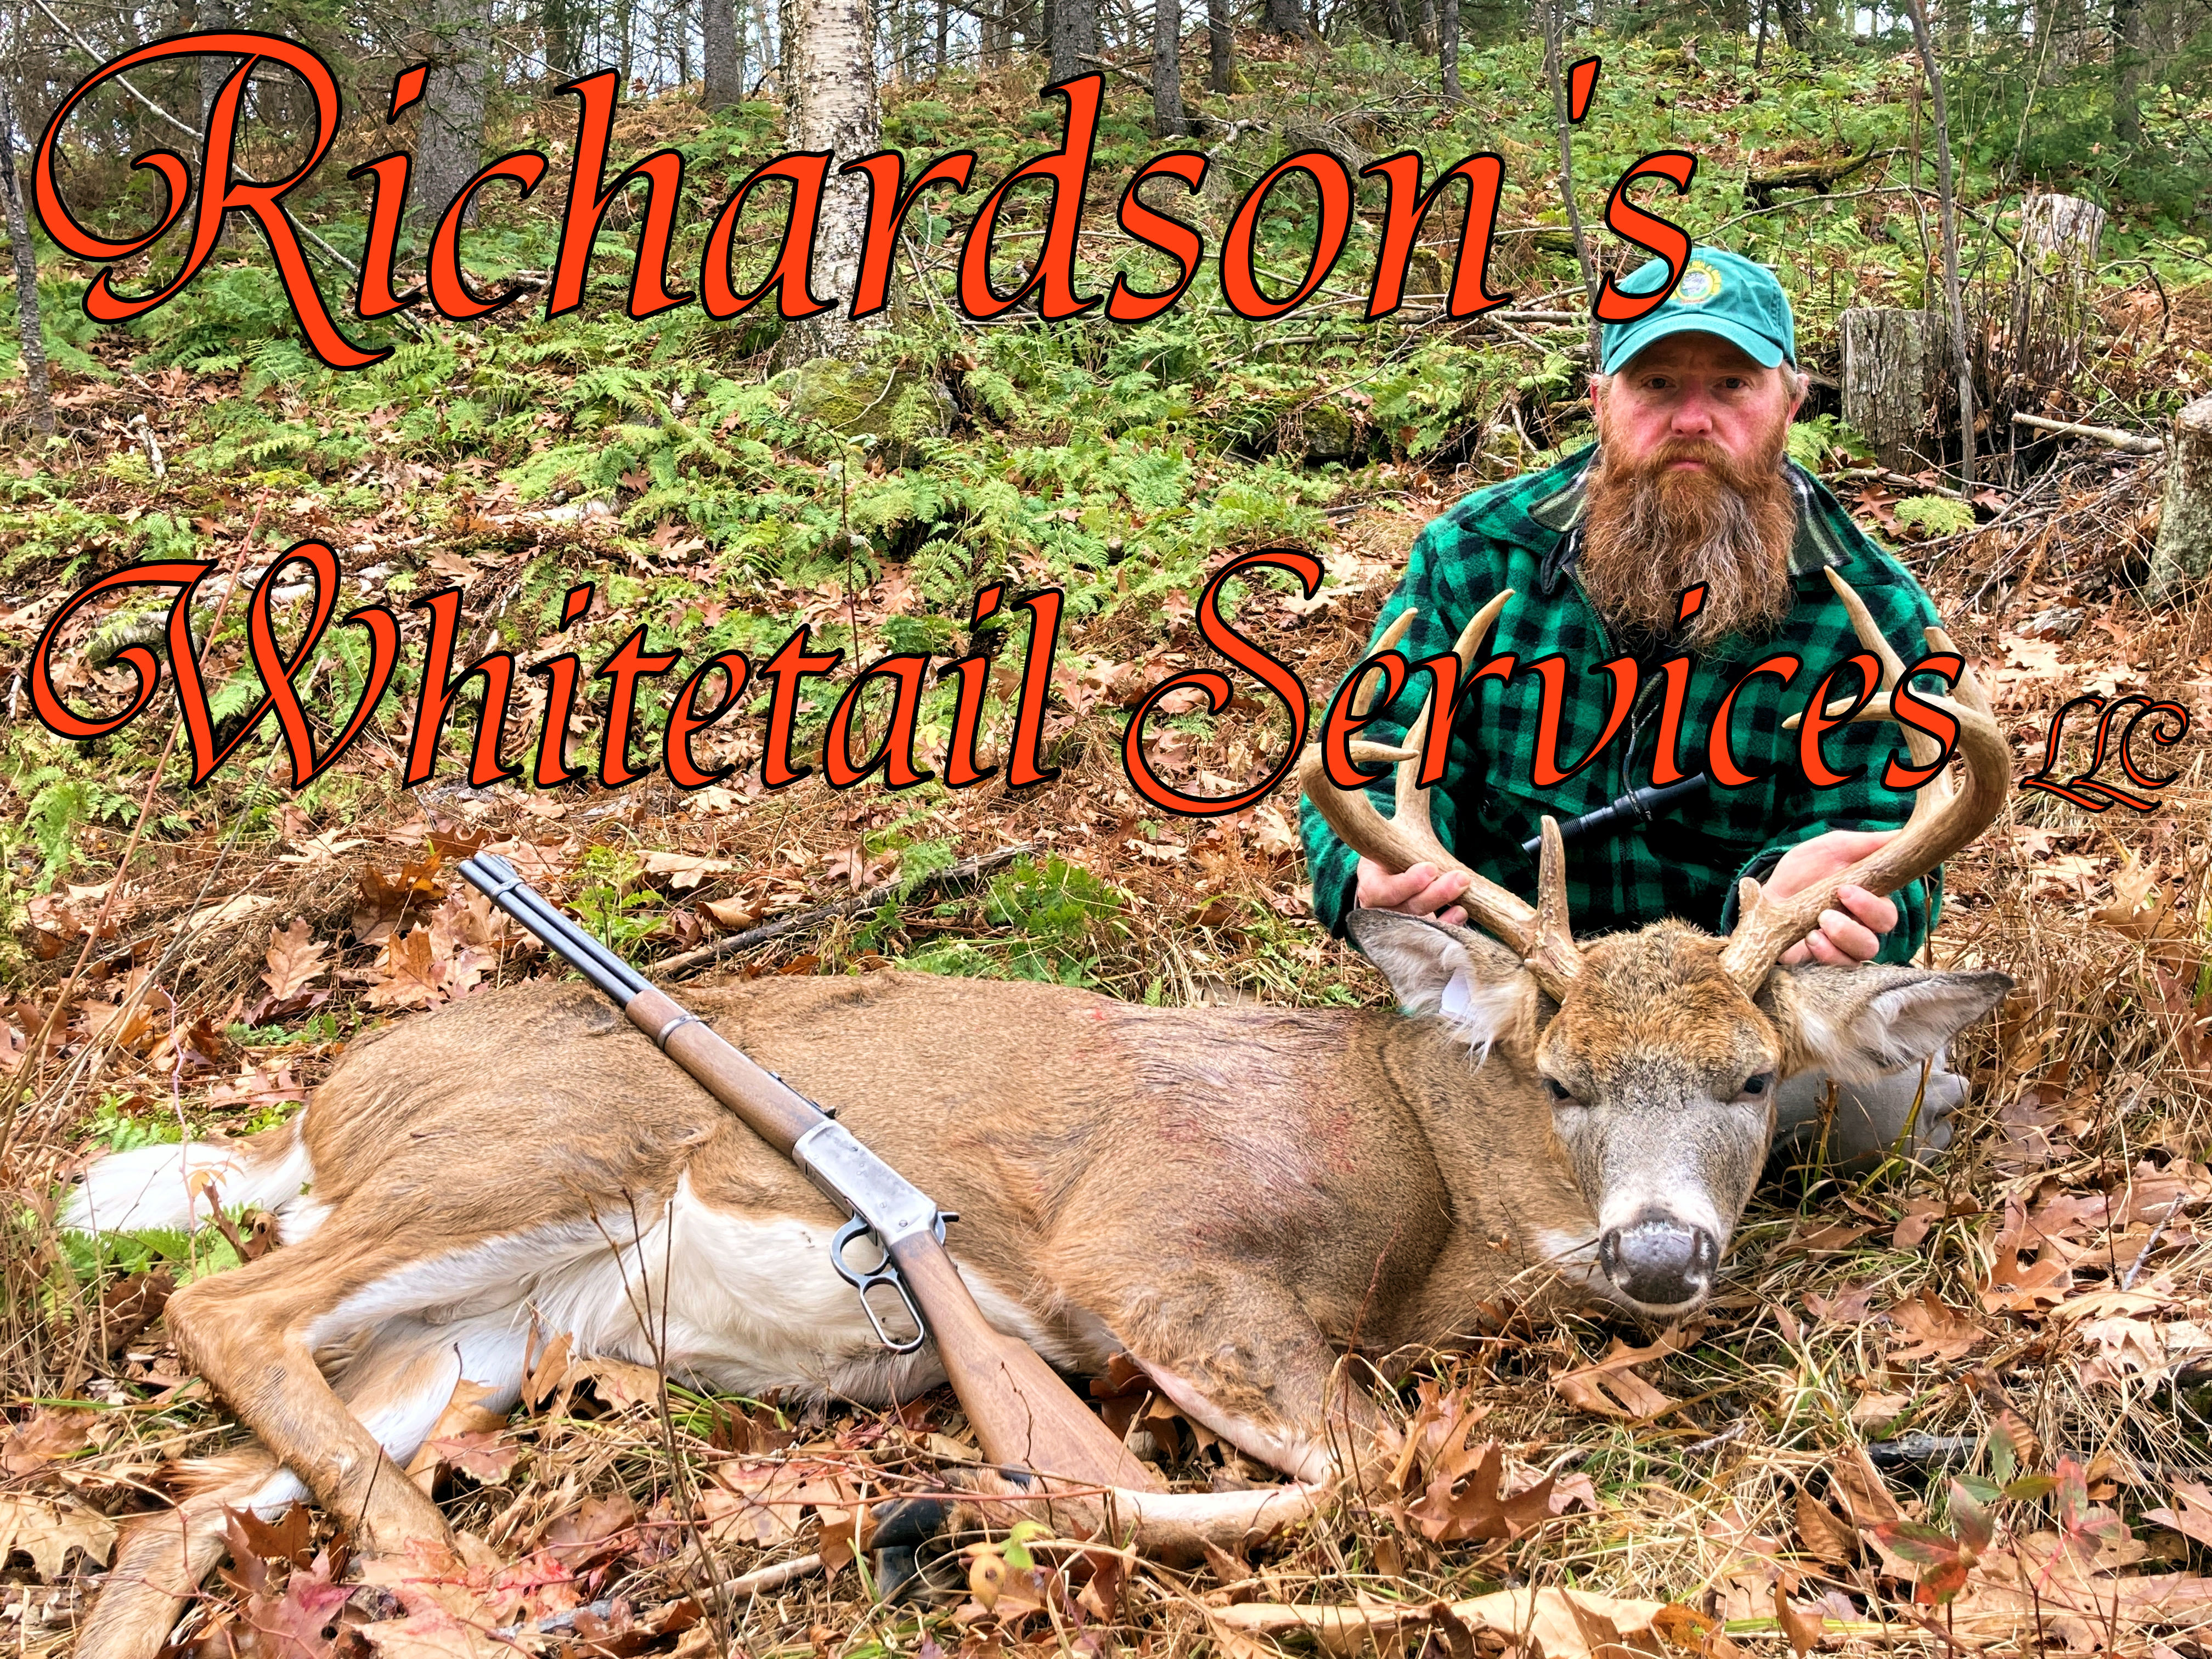 richardsons whitetail services